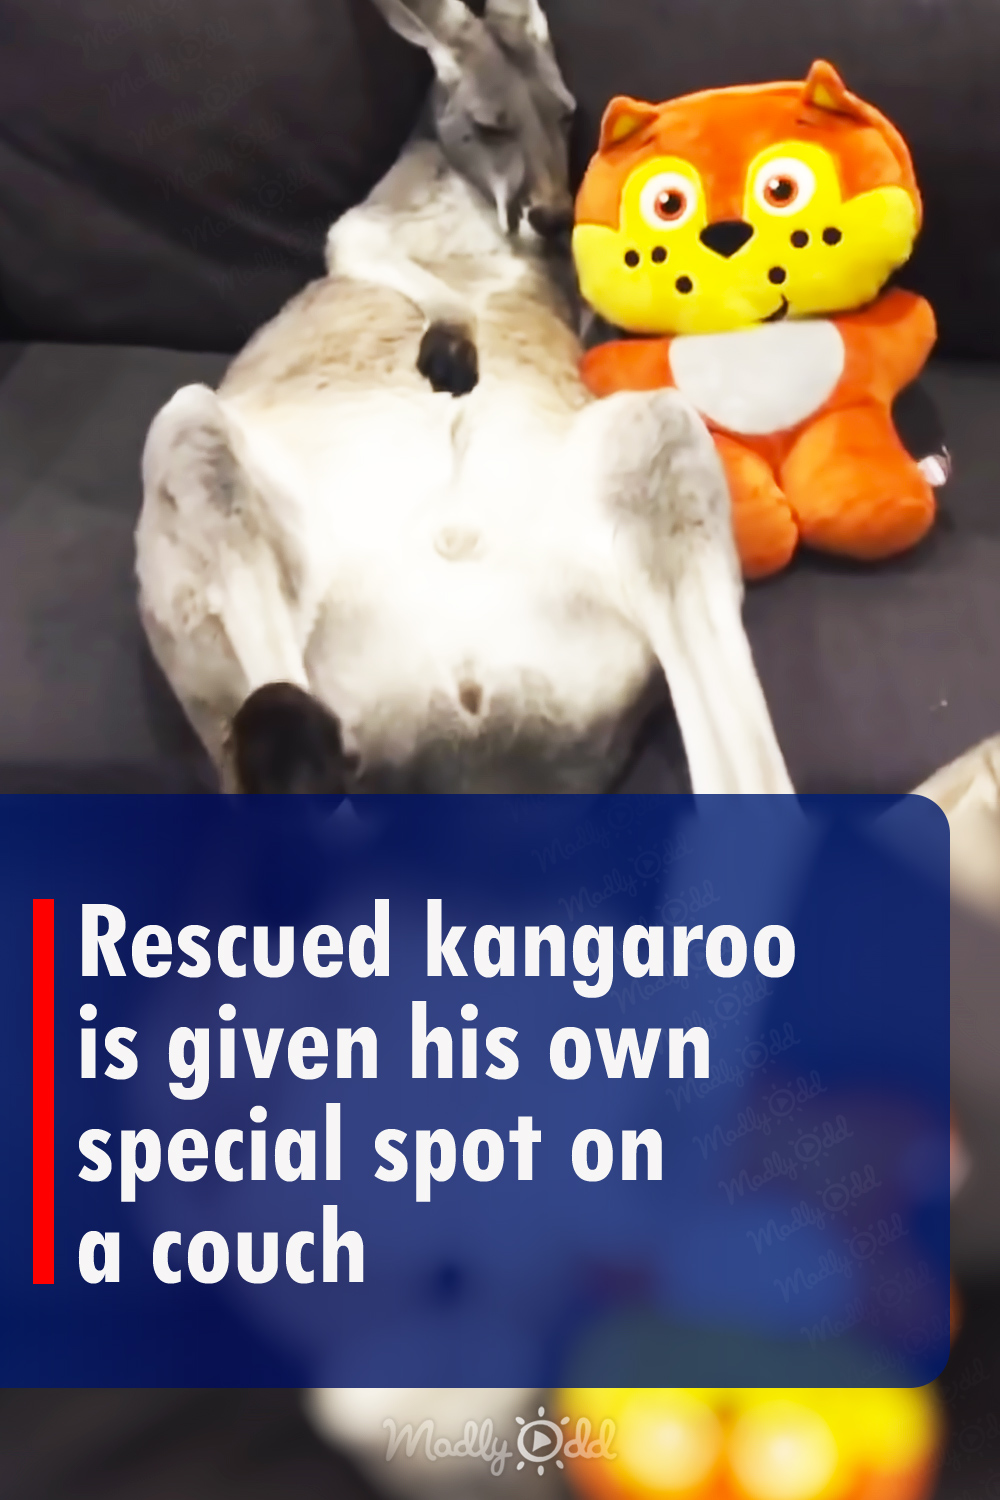 Rescued kangaroo is given his own special spot on a couch